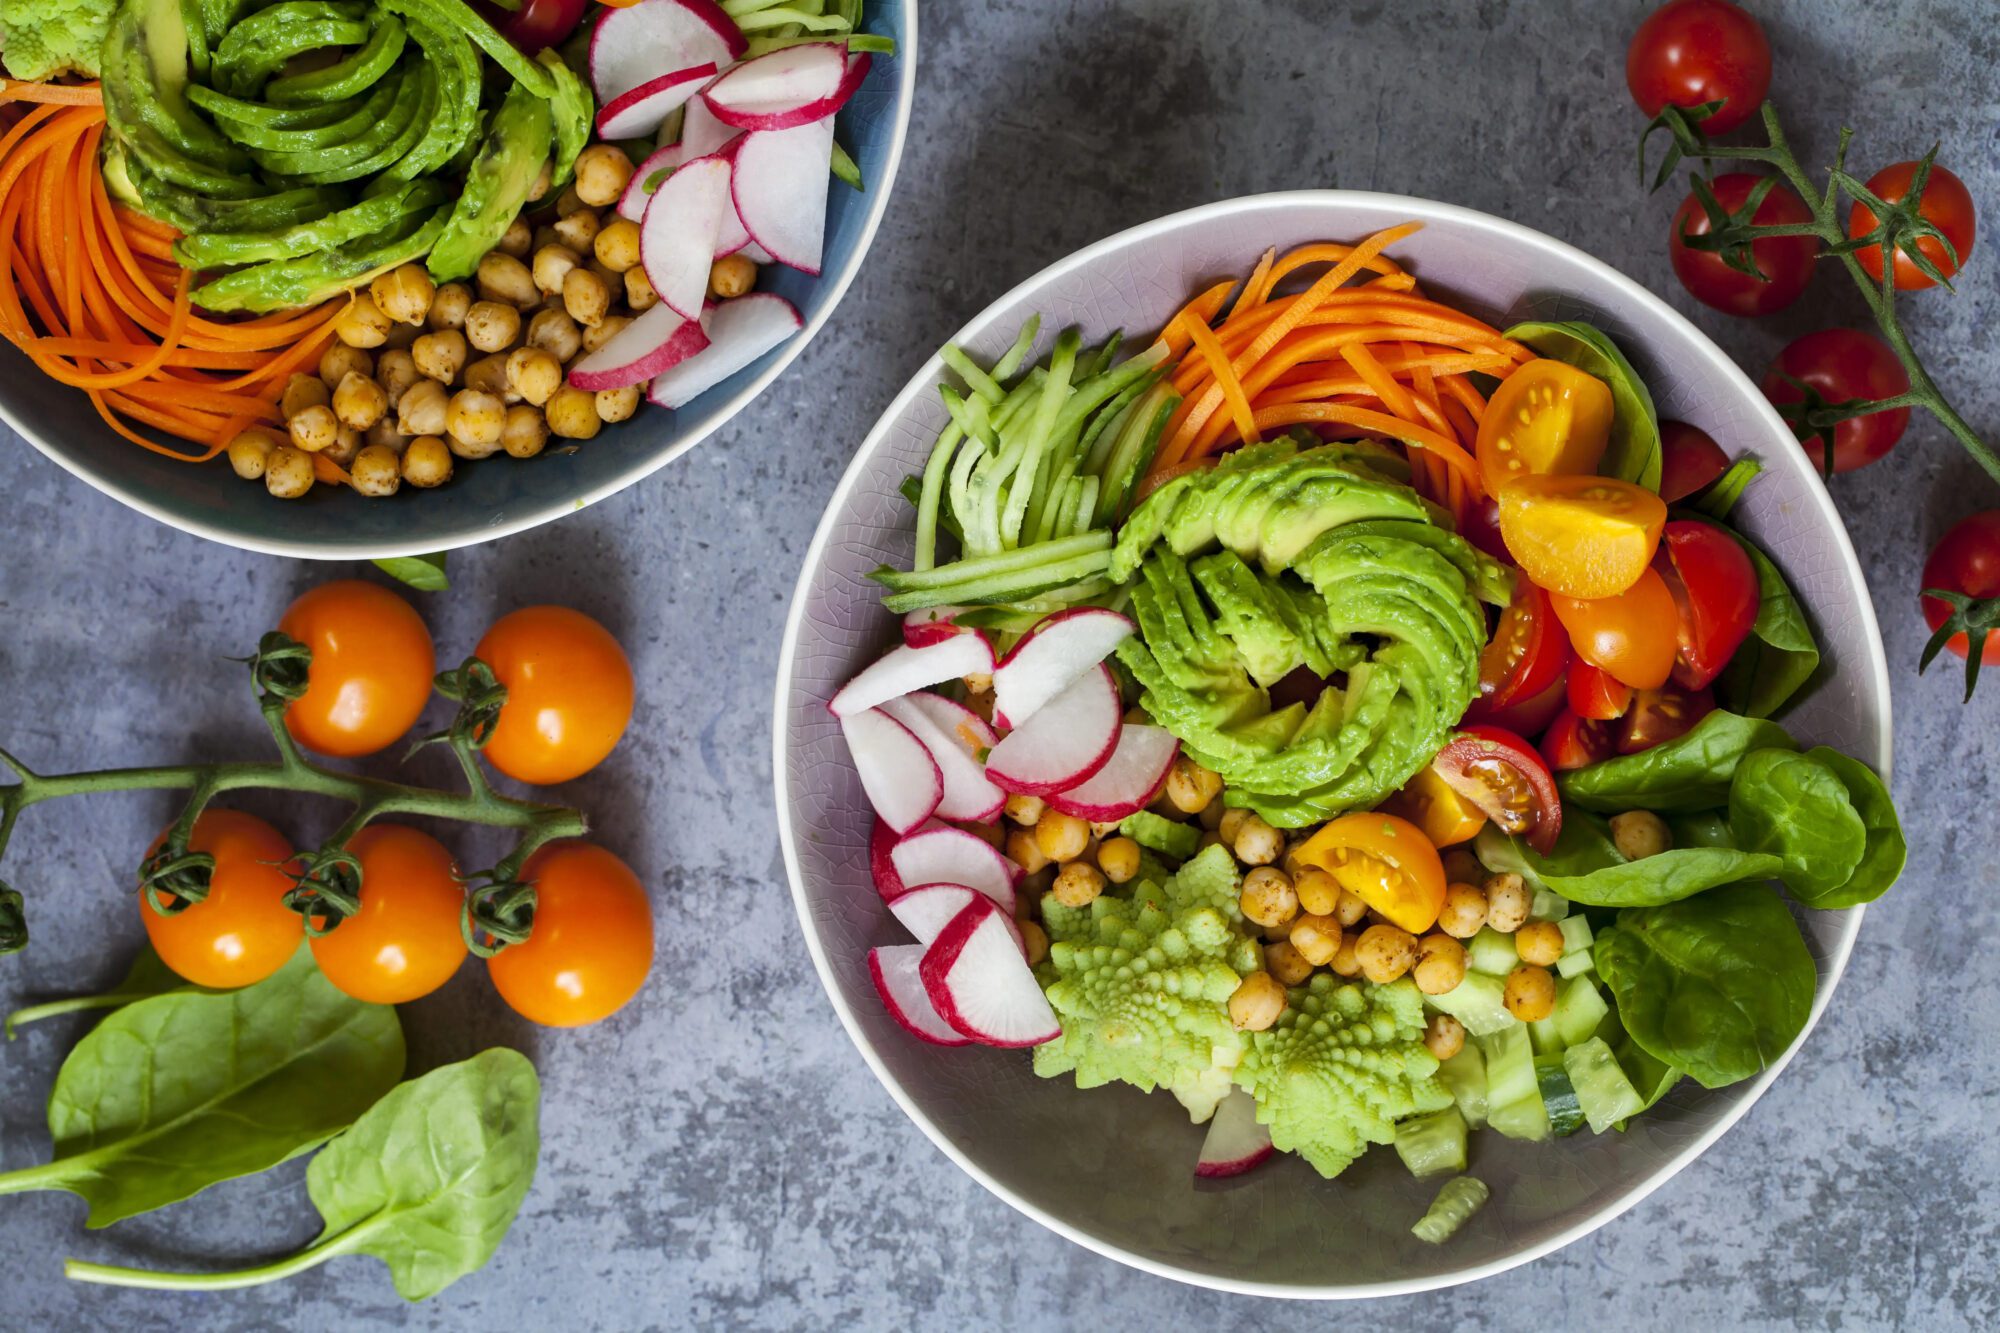 How are Plant-Based Food Trends Impacting the Hospitality sector?